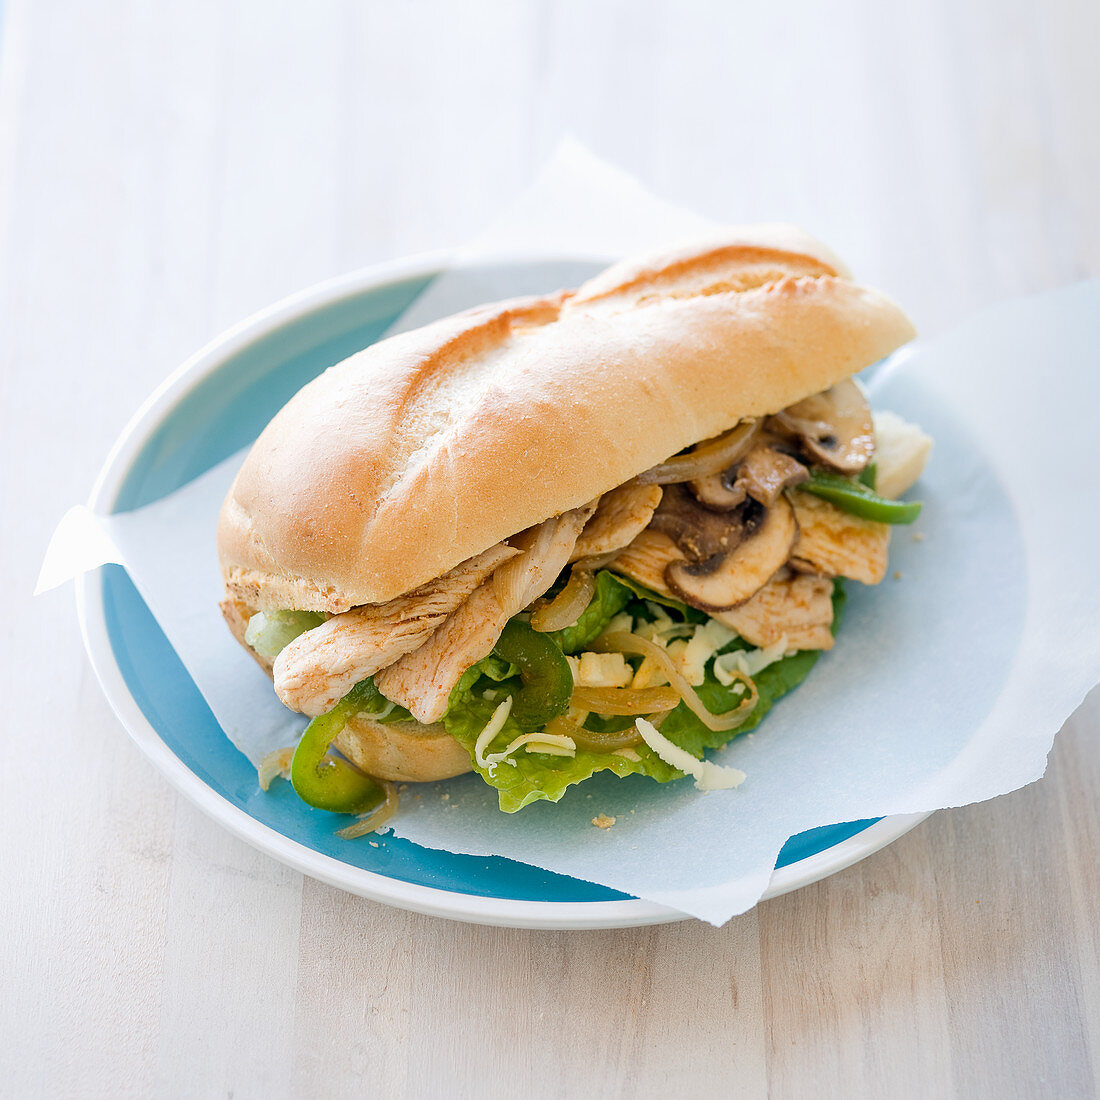 Chicken submarine sandwich with onions, mushrooms and bellpepper